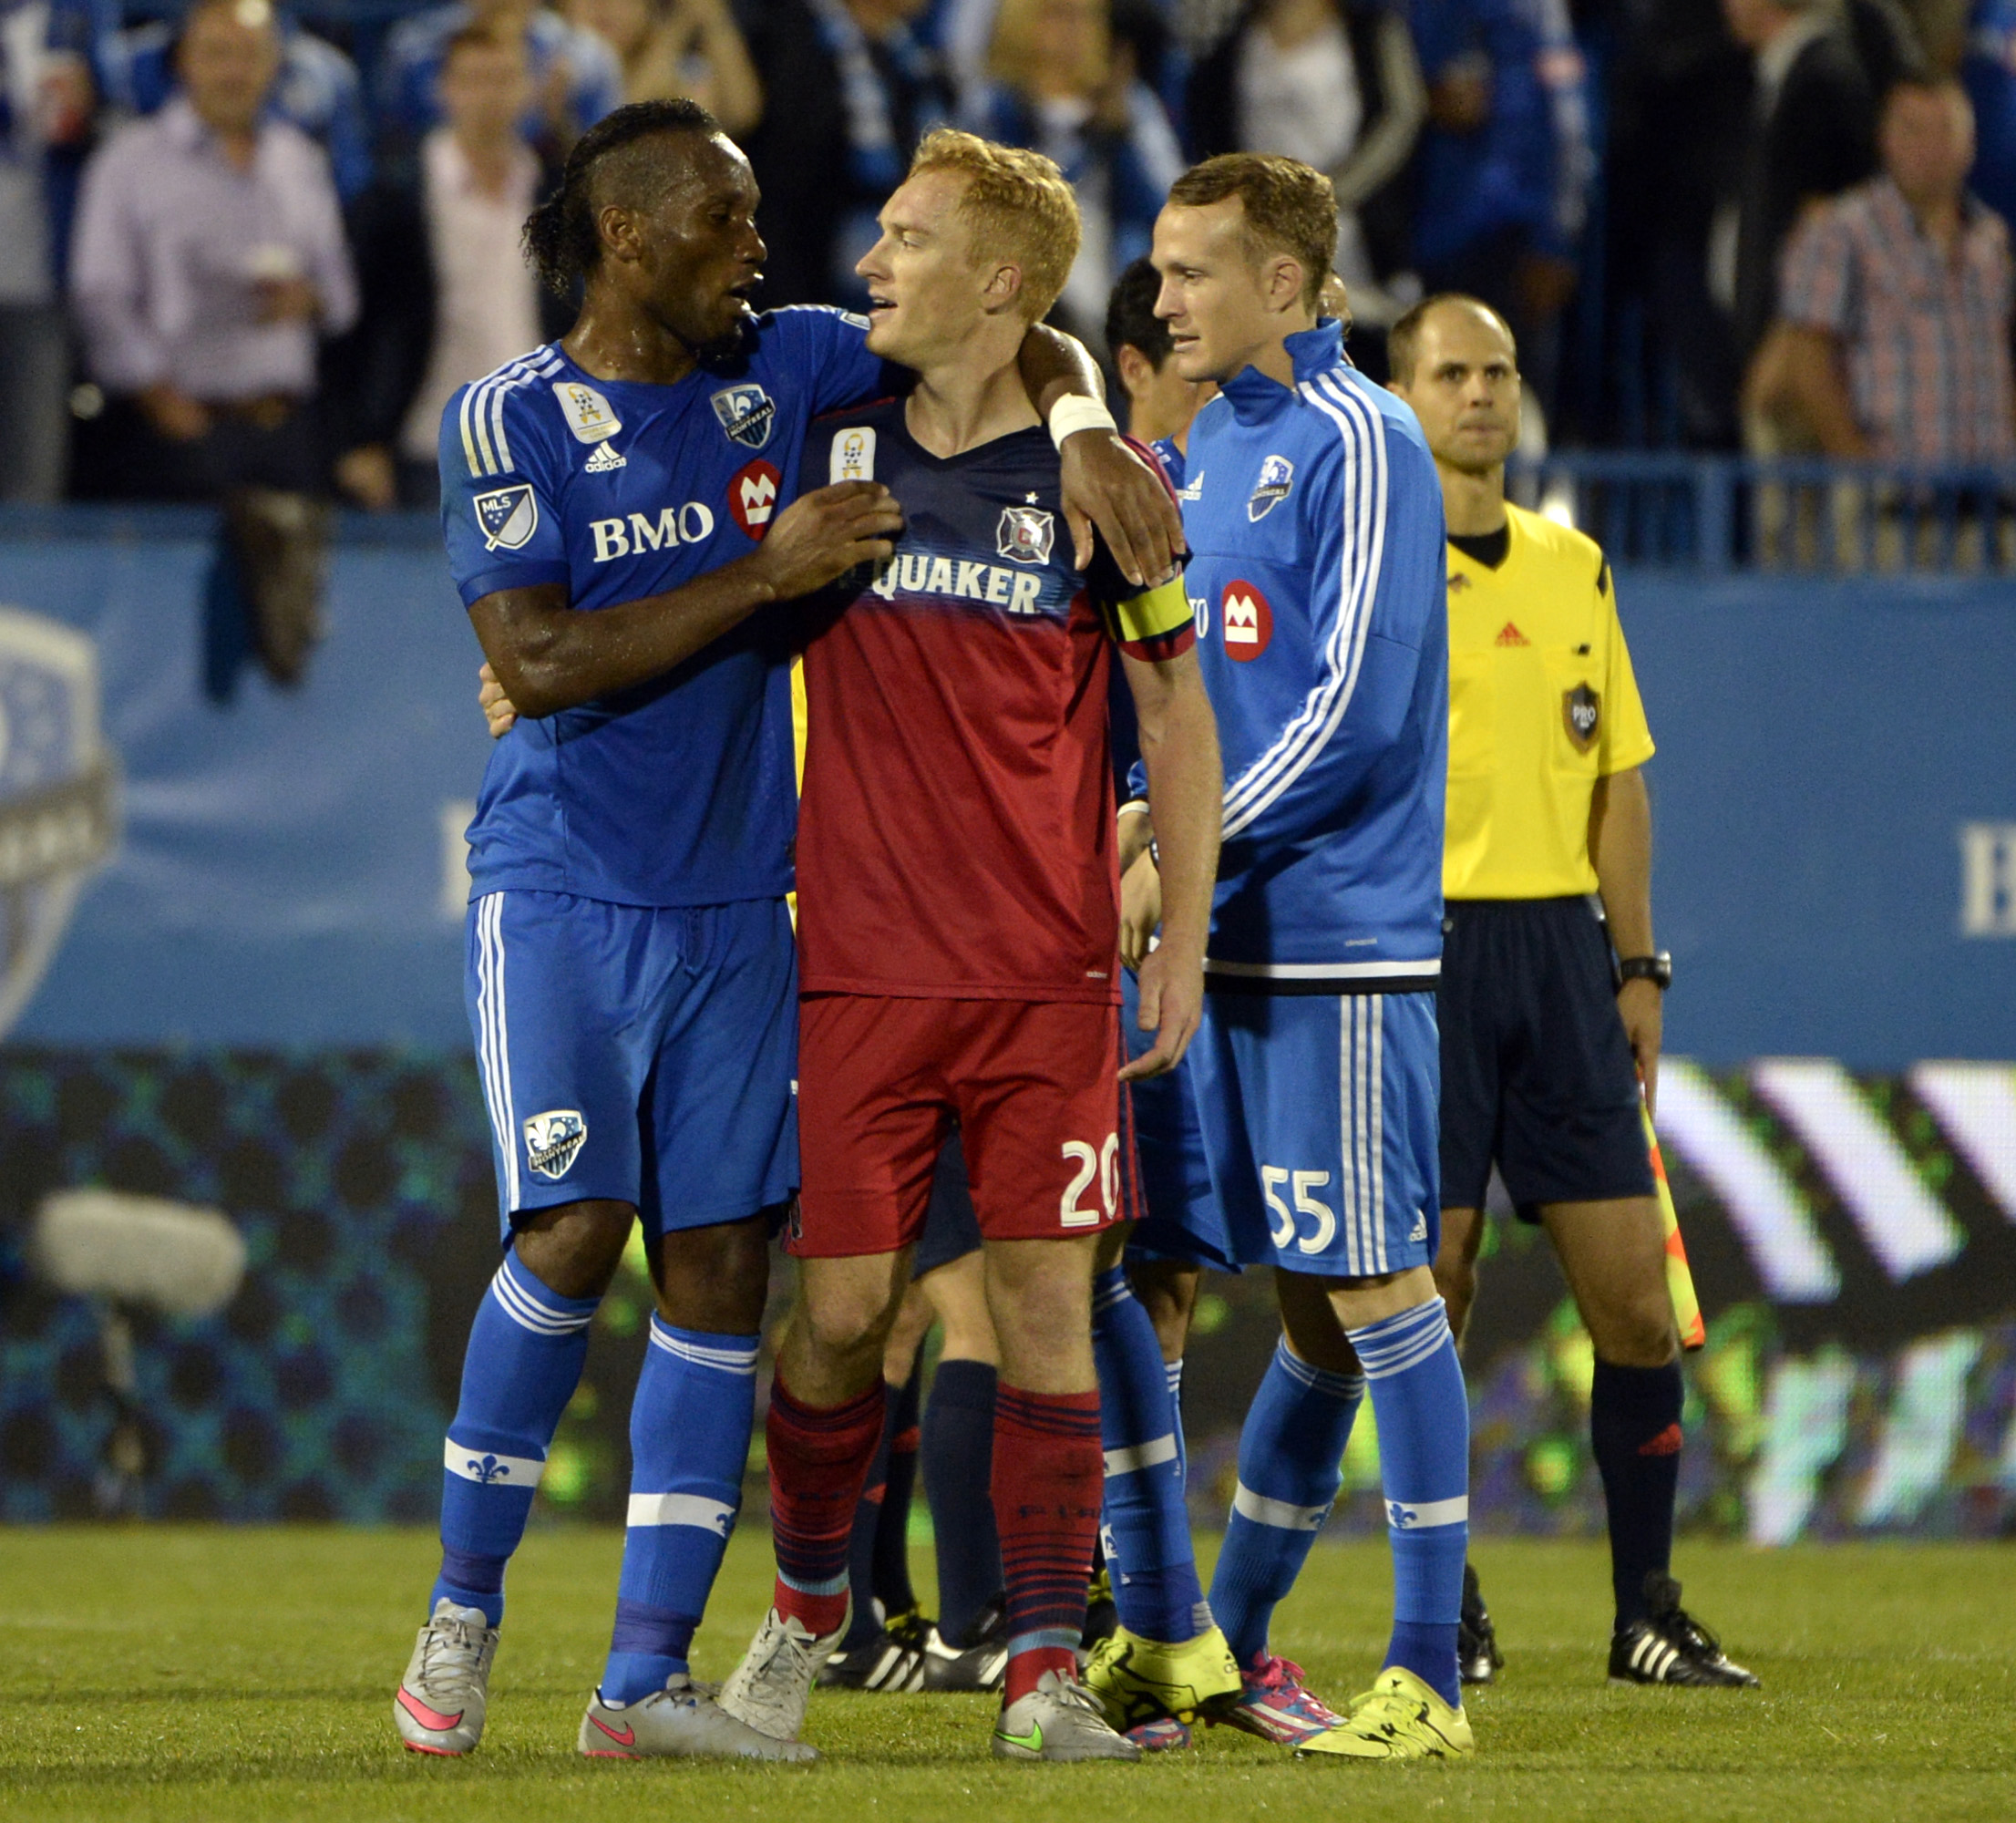 Didier Drogba talks to Chicago Fire's Jeff Larentowicz after the game on September 23rd, 2015.